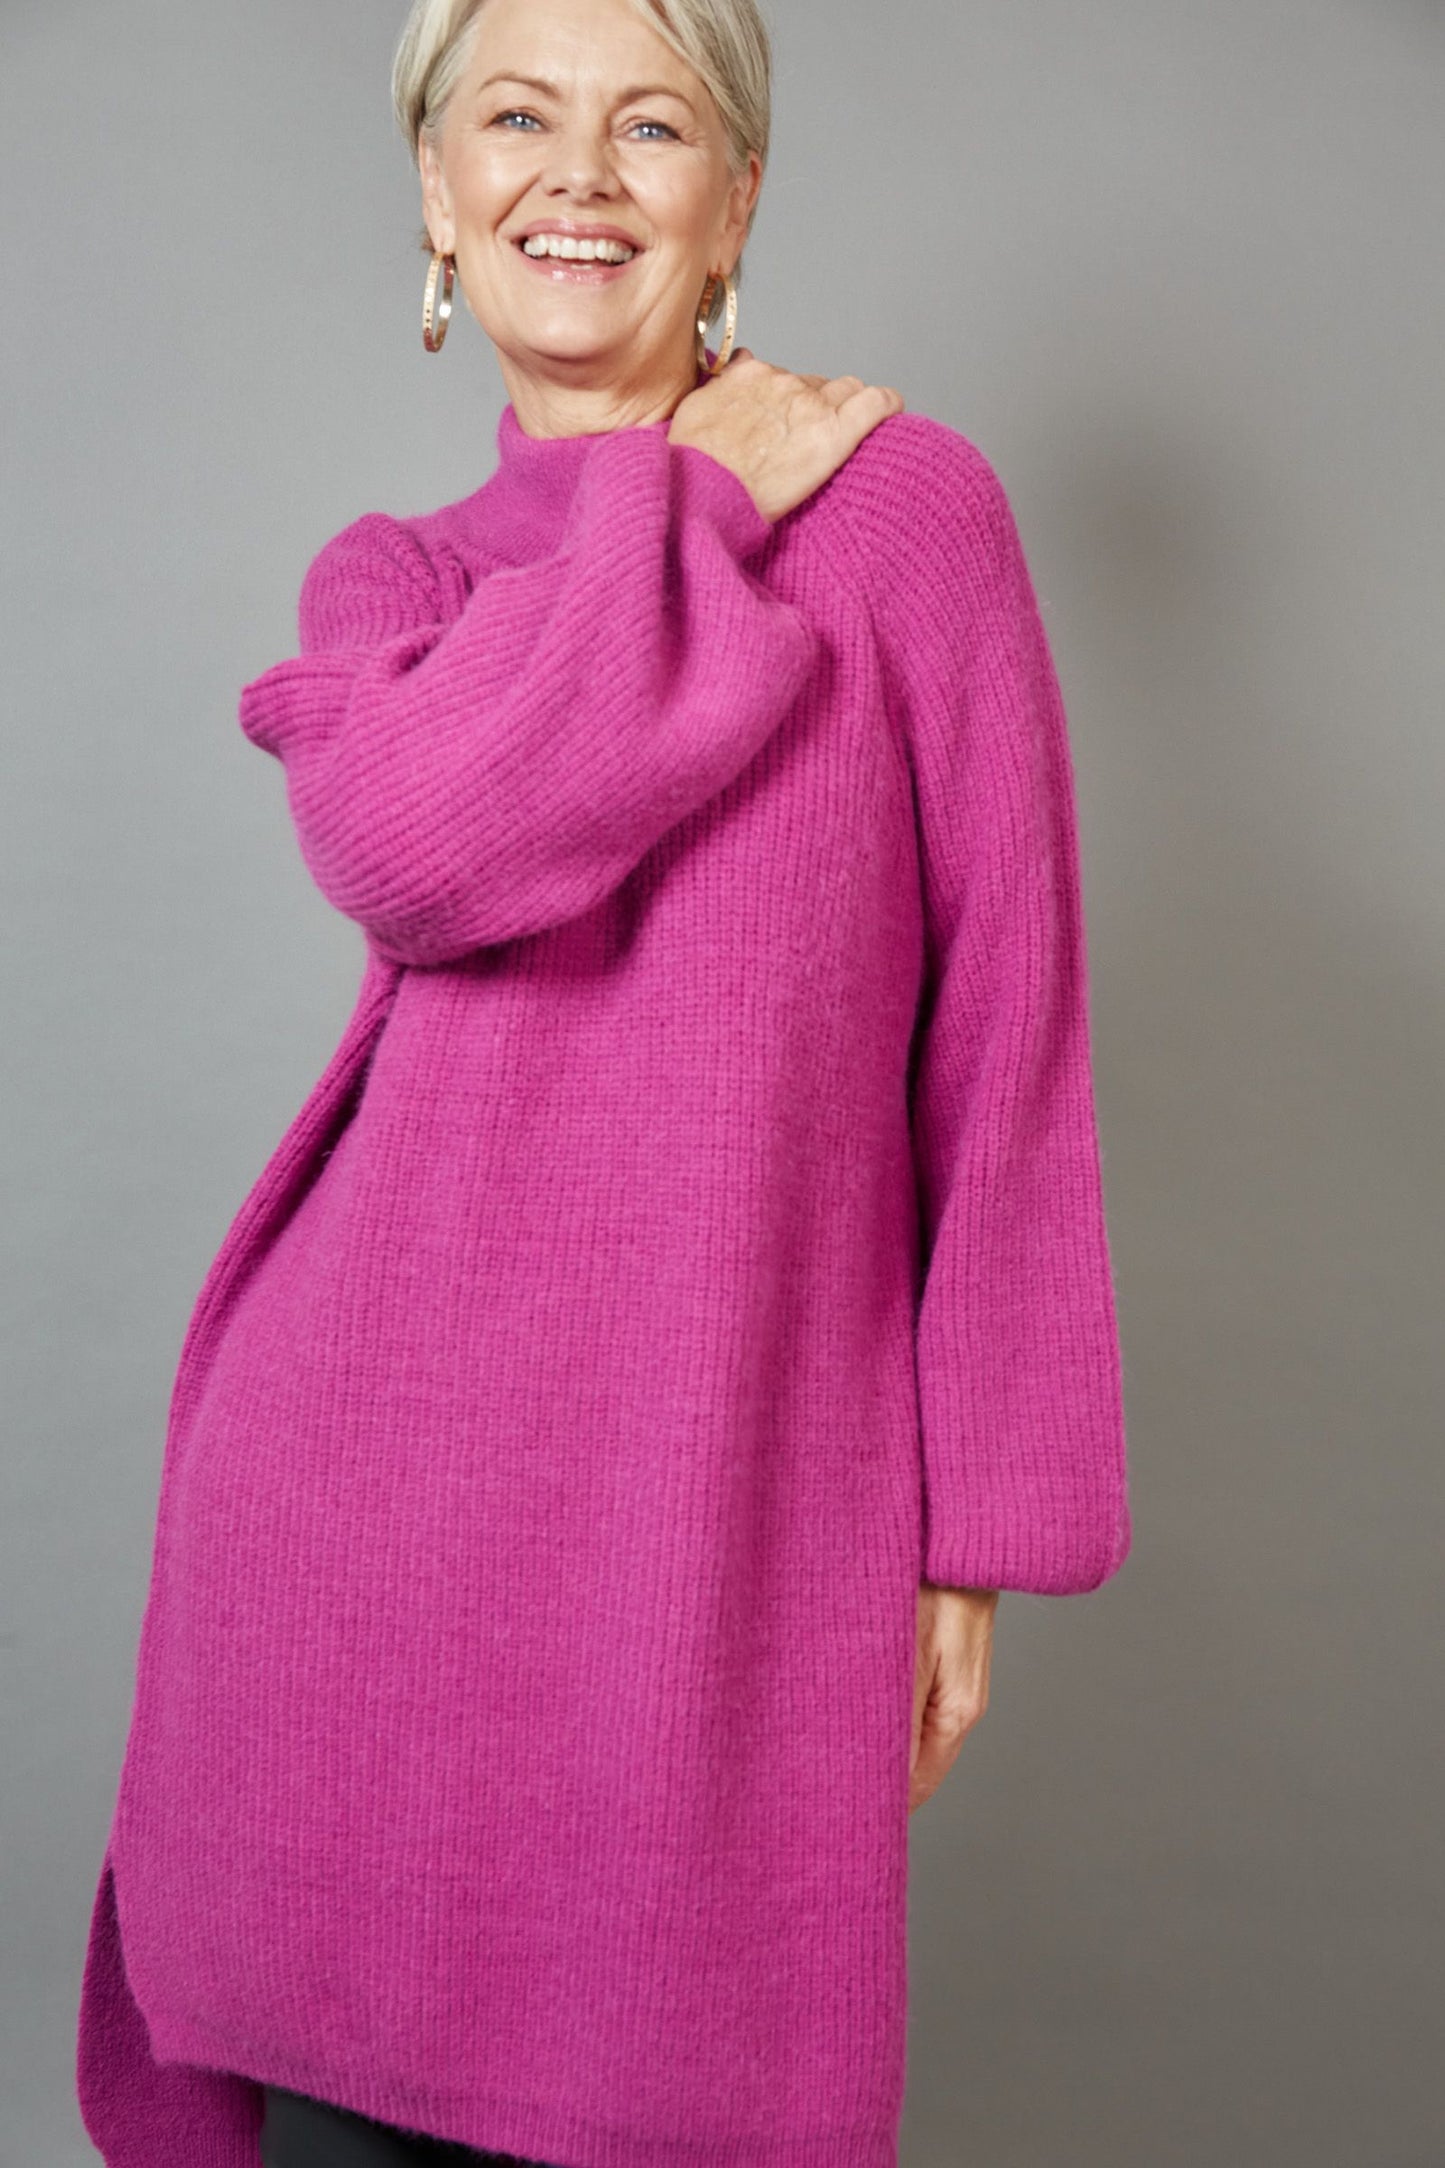 Kit Knit Top/Dress - Mulberry - Eb & Ive